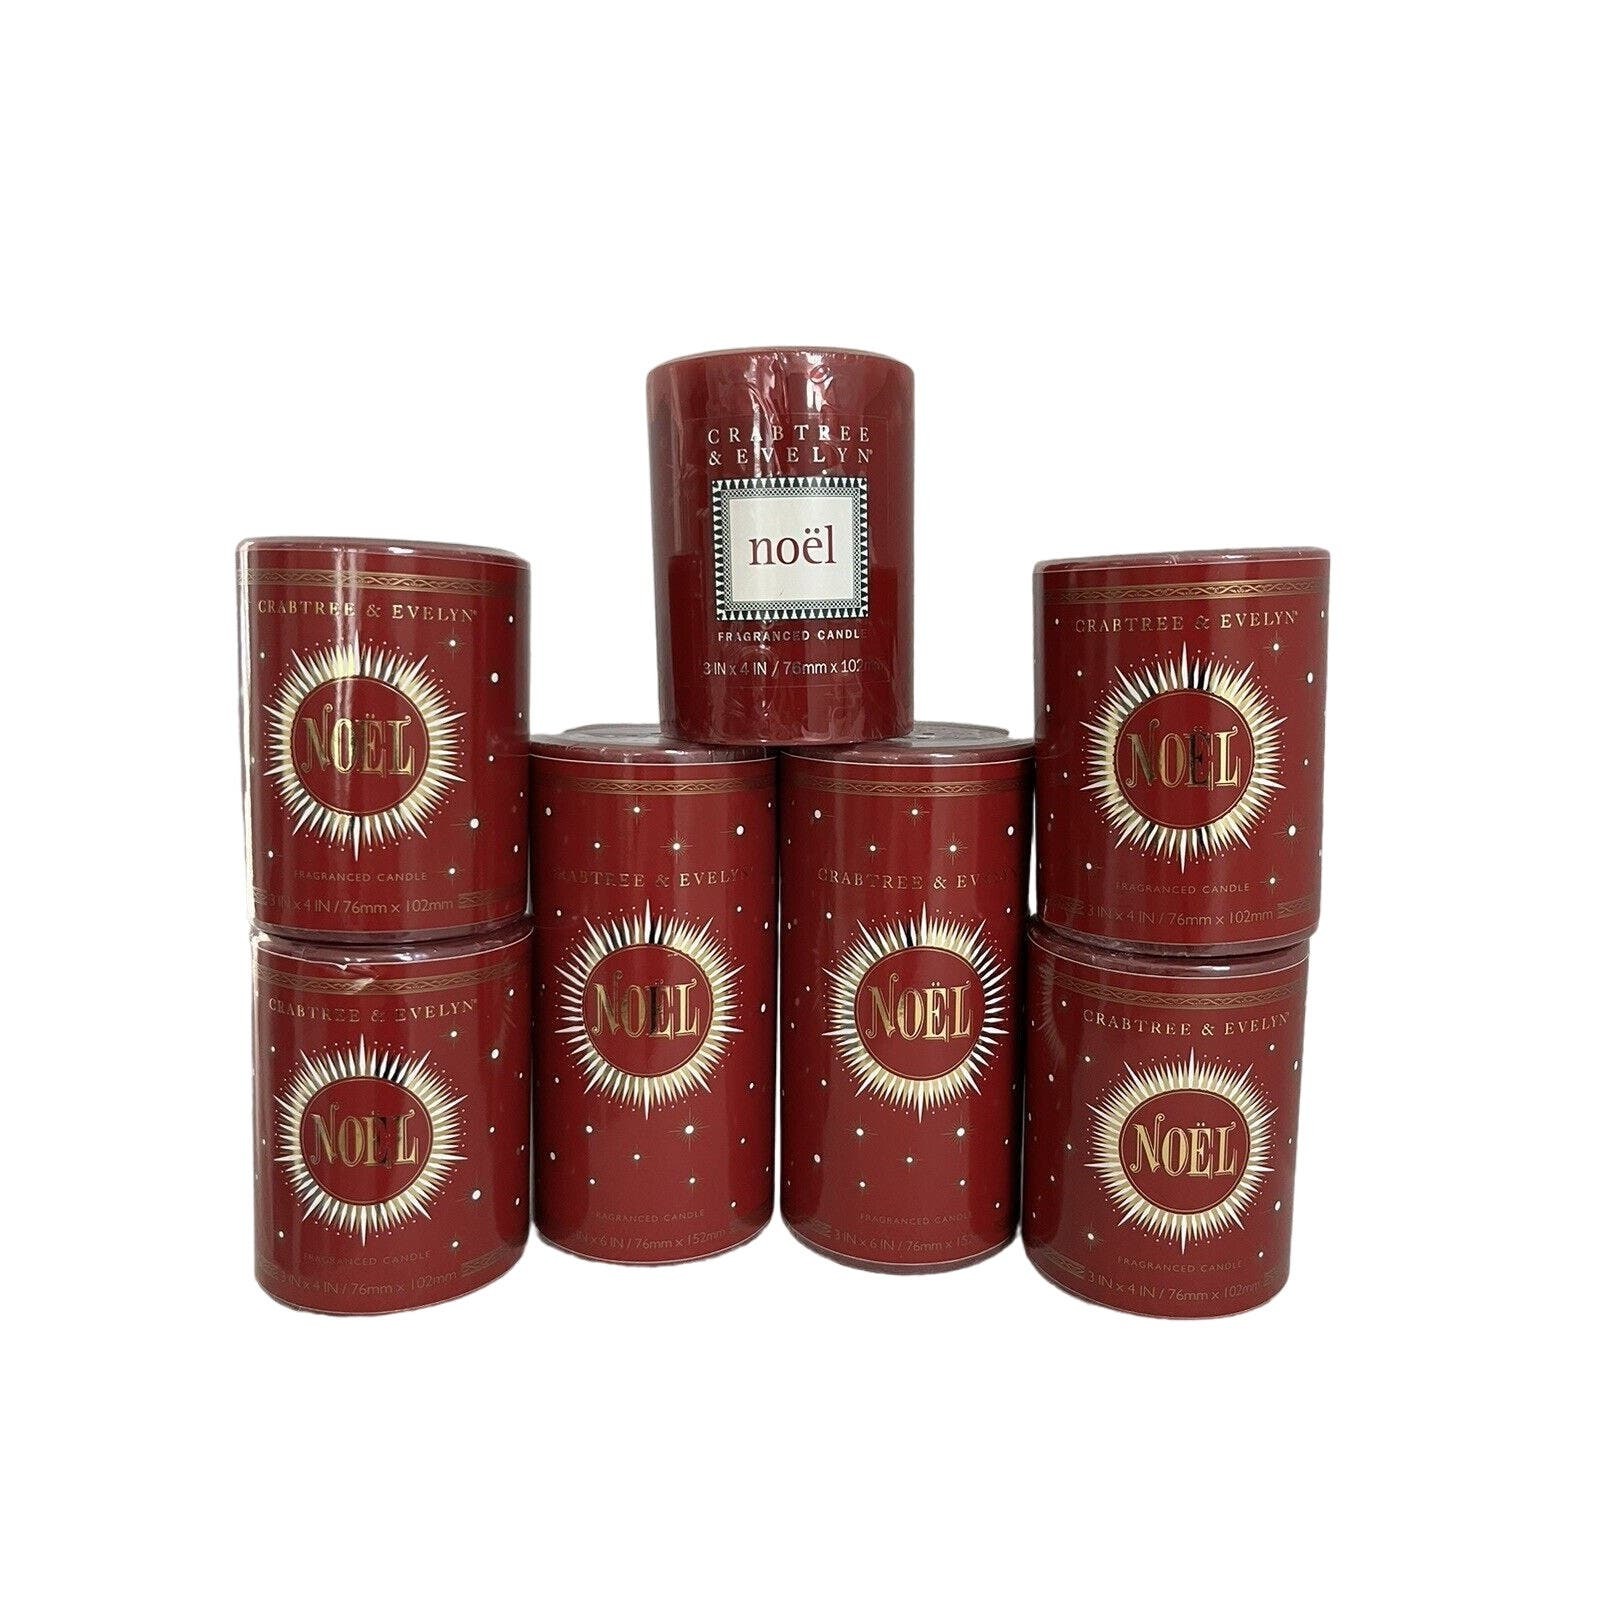 7x Crabtree & Evelyn Noel Pillar Candles HTF Discontinued 4-6” Holiday Christmas - $271.55